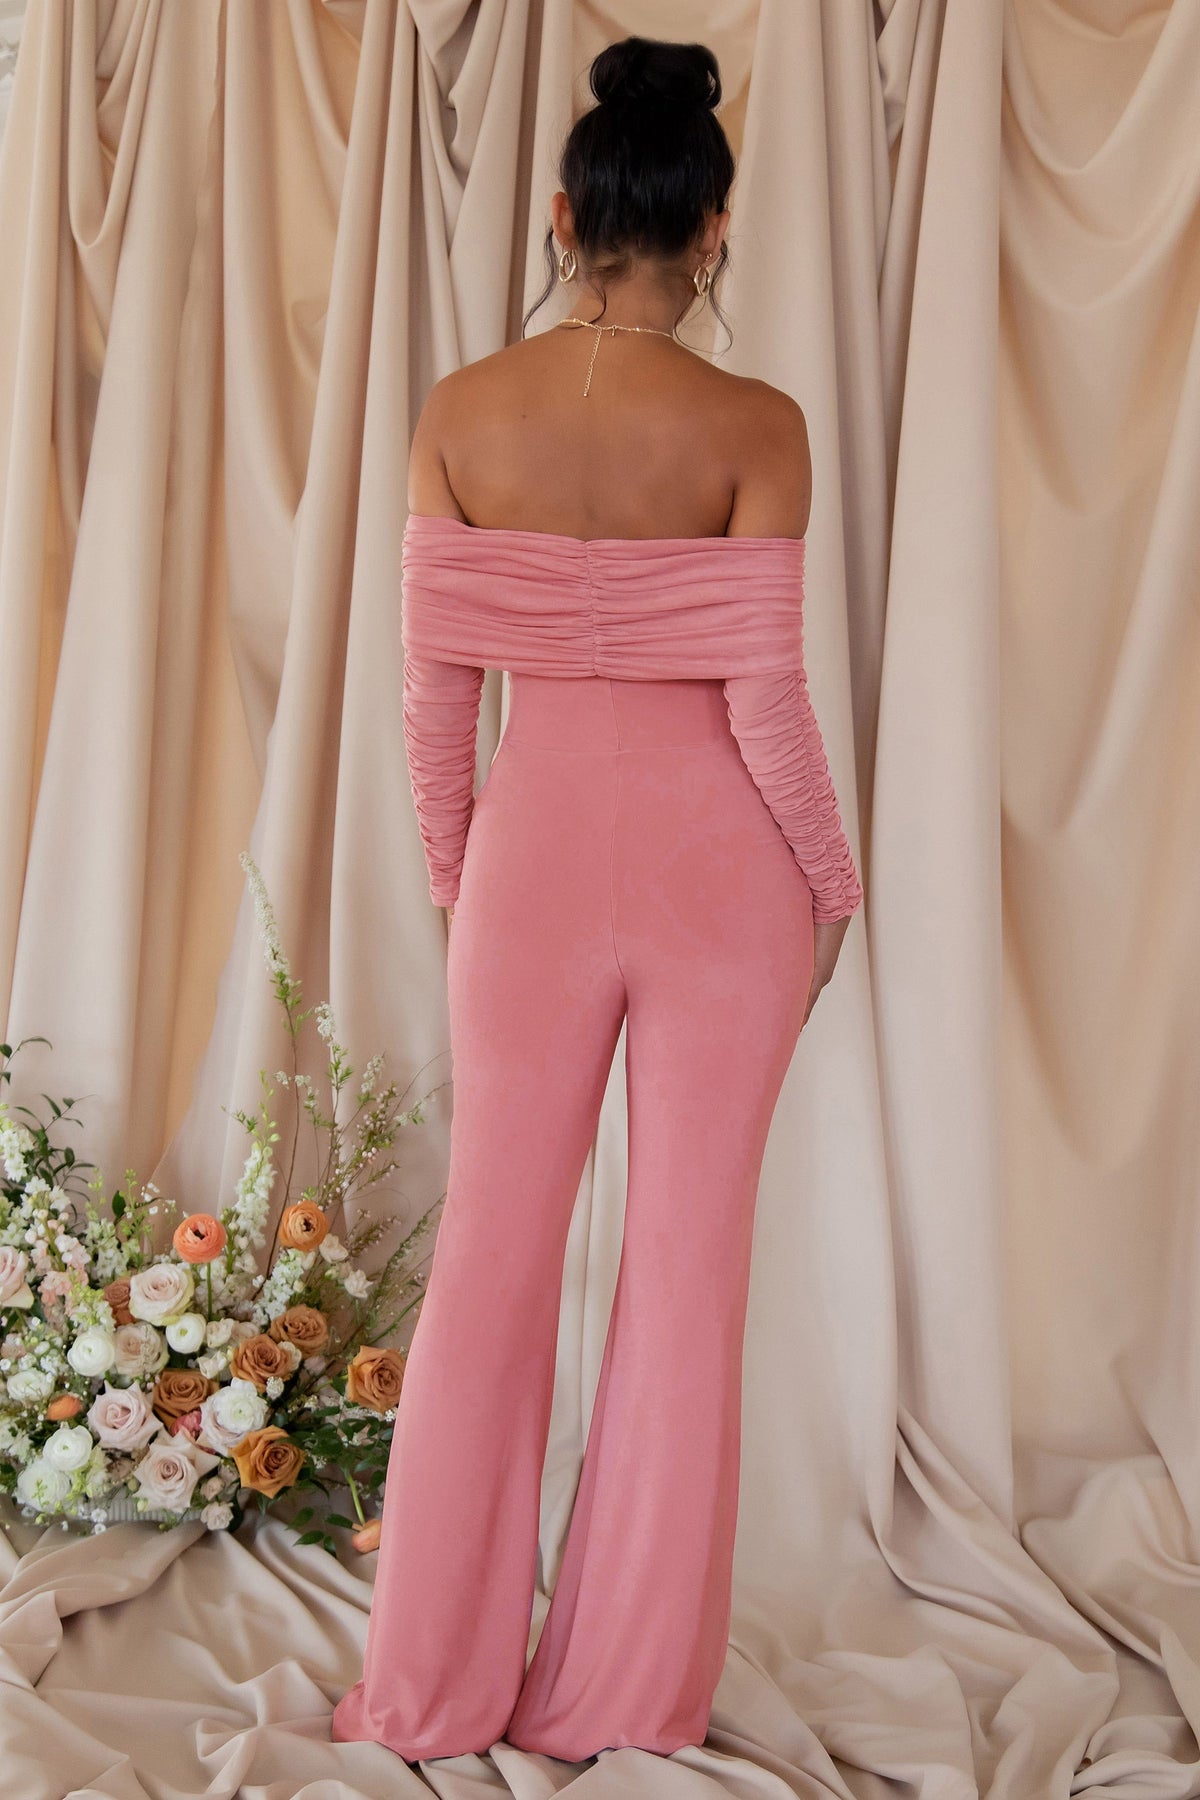 No Issues Here Mineral Wash Cargo Jumpsuit (Pink) · NanaMacs